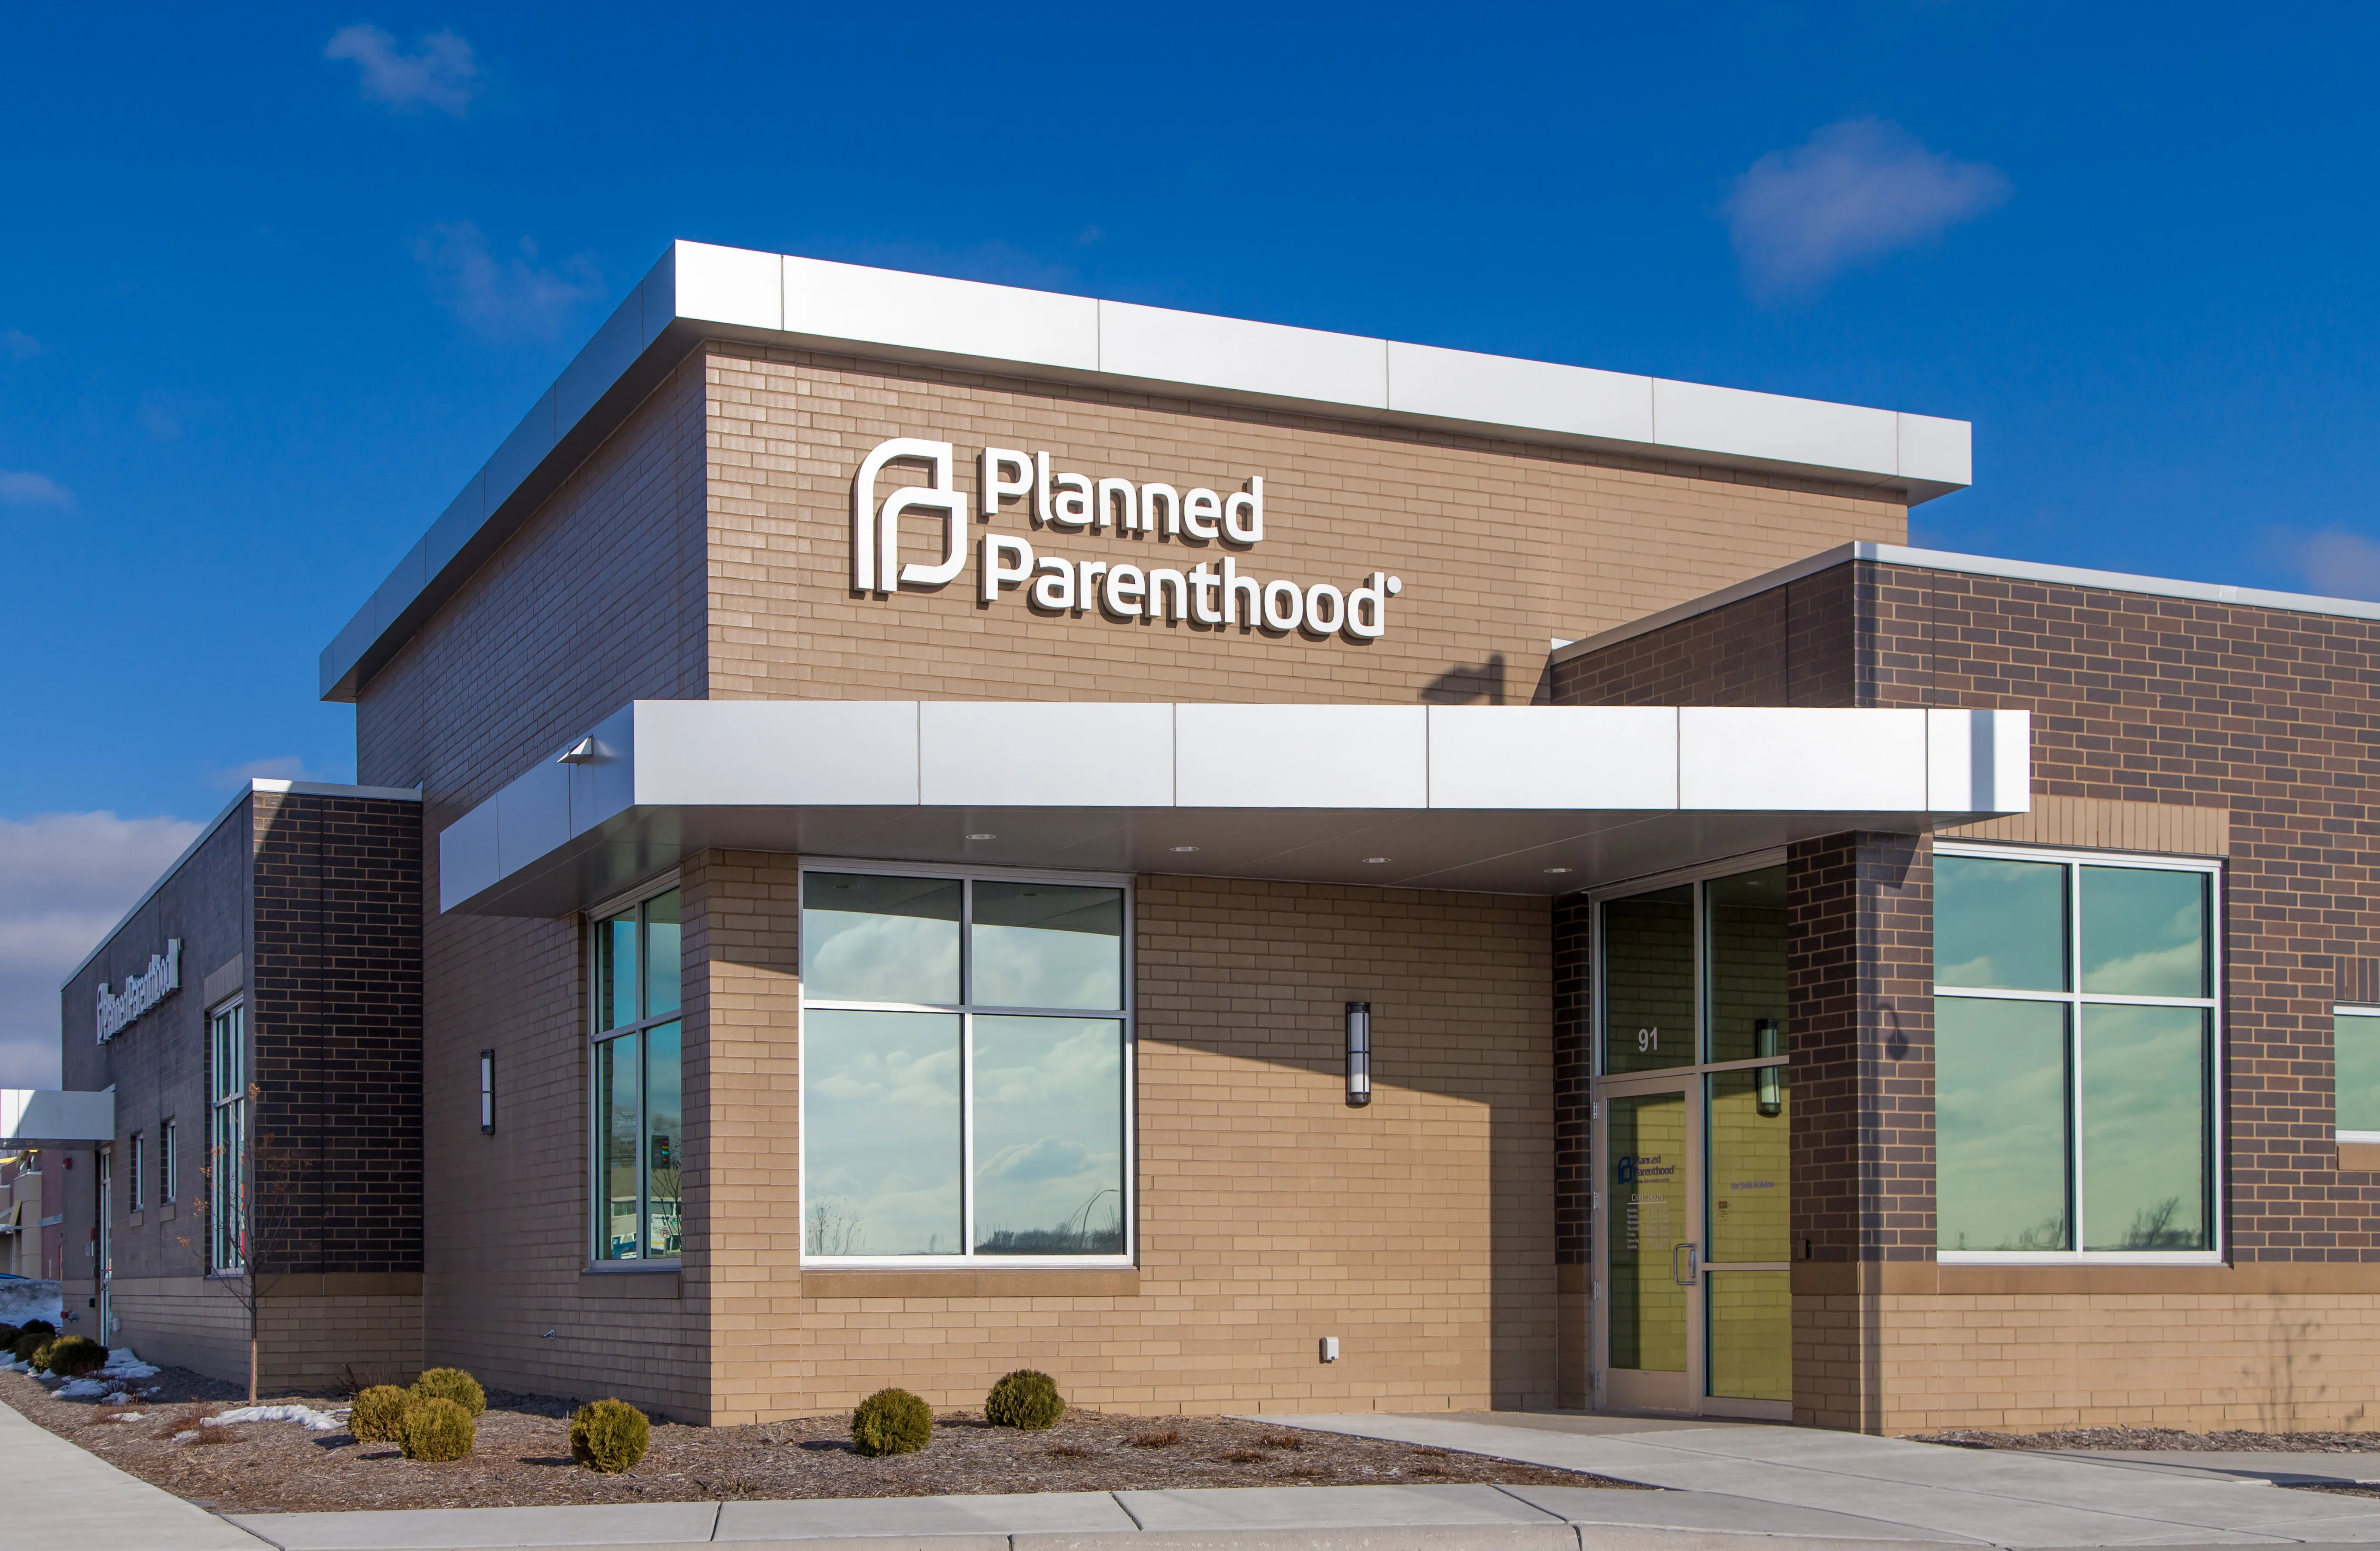 Planned Parenthood gets millions of dollars in federal support each year.?w=200&h=150